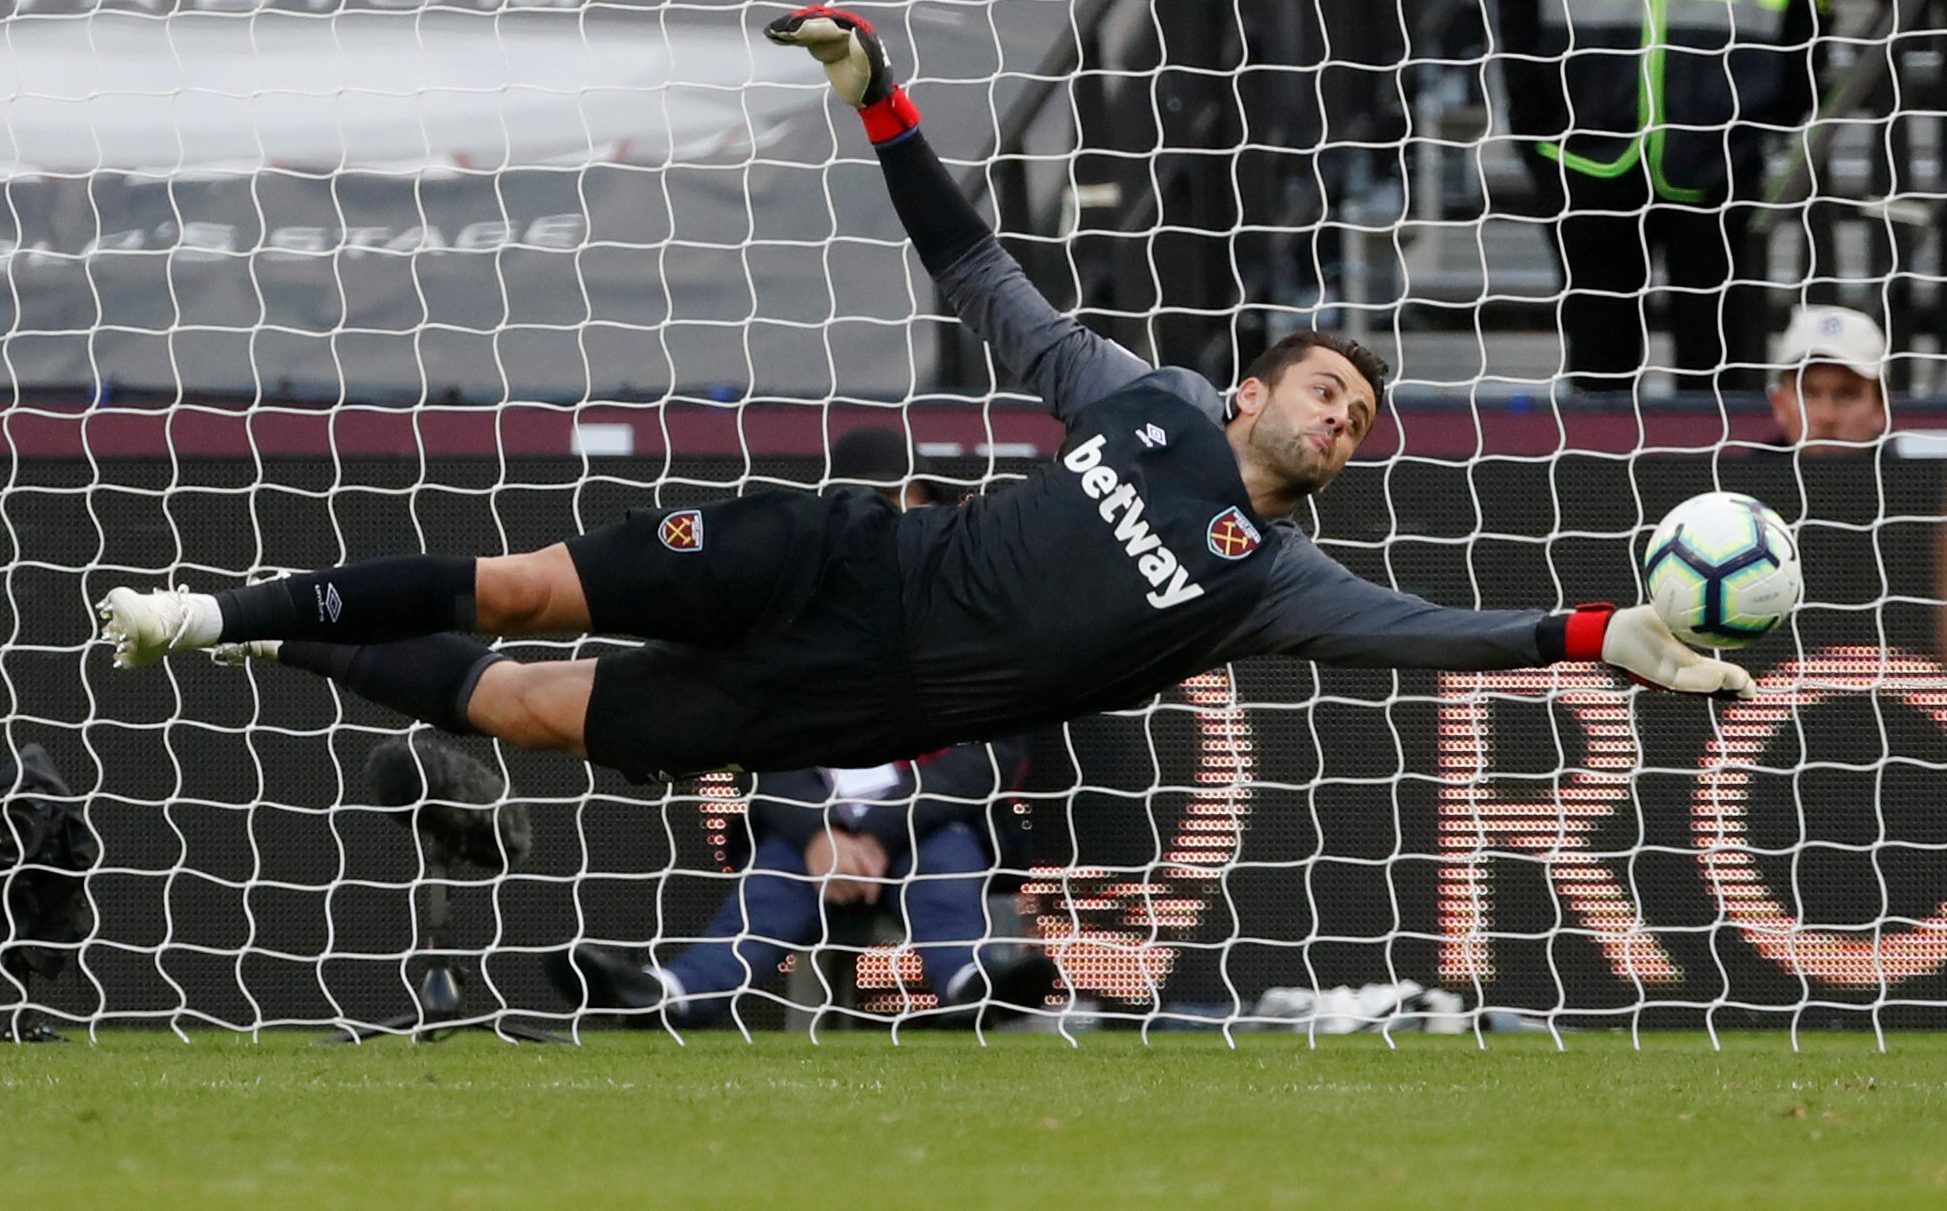 Soccer Football - Premier League - West Ham United v Chelsea - London Stadium, London, Britain - September 23, 2018  West Ham's Lukasz Fabianski makes a save     Action Images via Reuters/Matthew Childs  EDITORIAL USE ONLY. No use with unauthorized audio, video, data, fixture lists, club/league logos or 